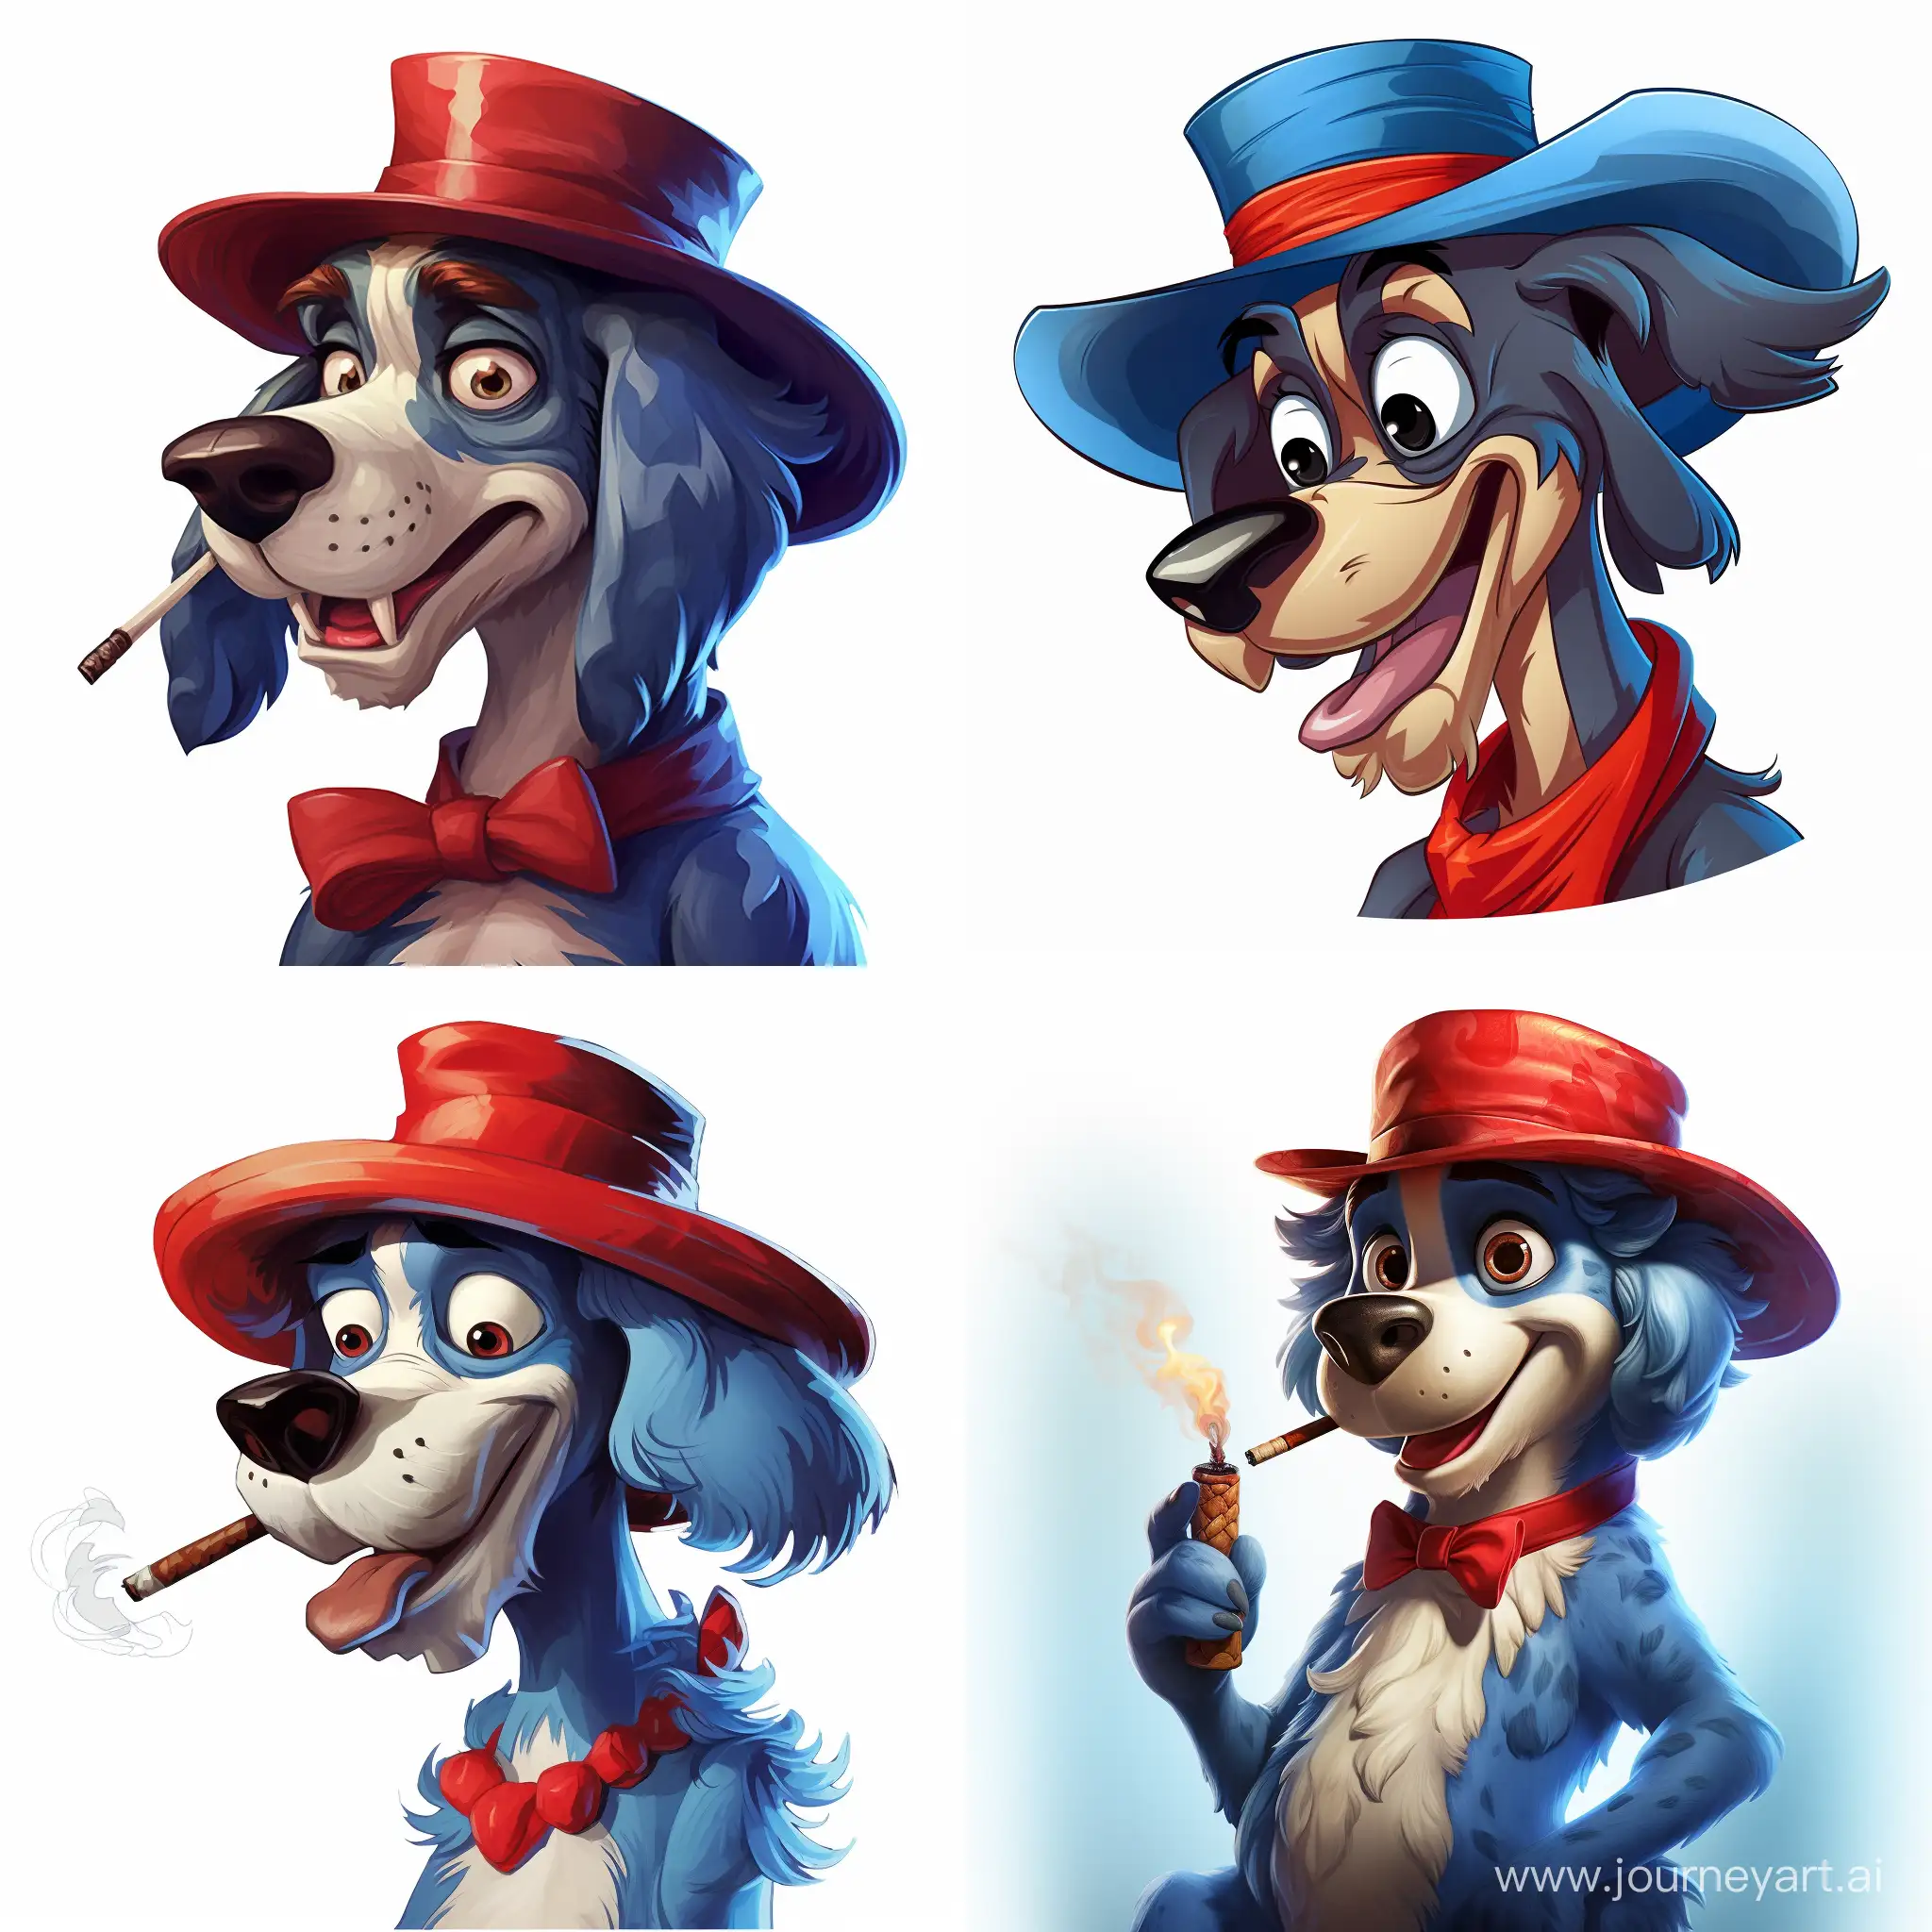 Animated-Blue-Dog-Smoking-Cigar-in-Red-Hat-on-White-Background